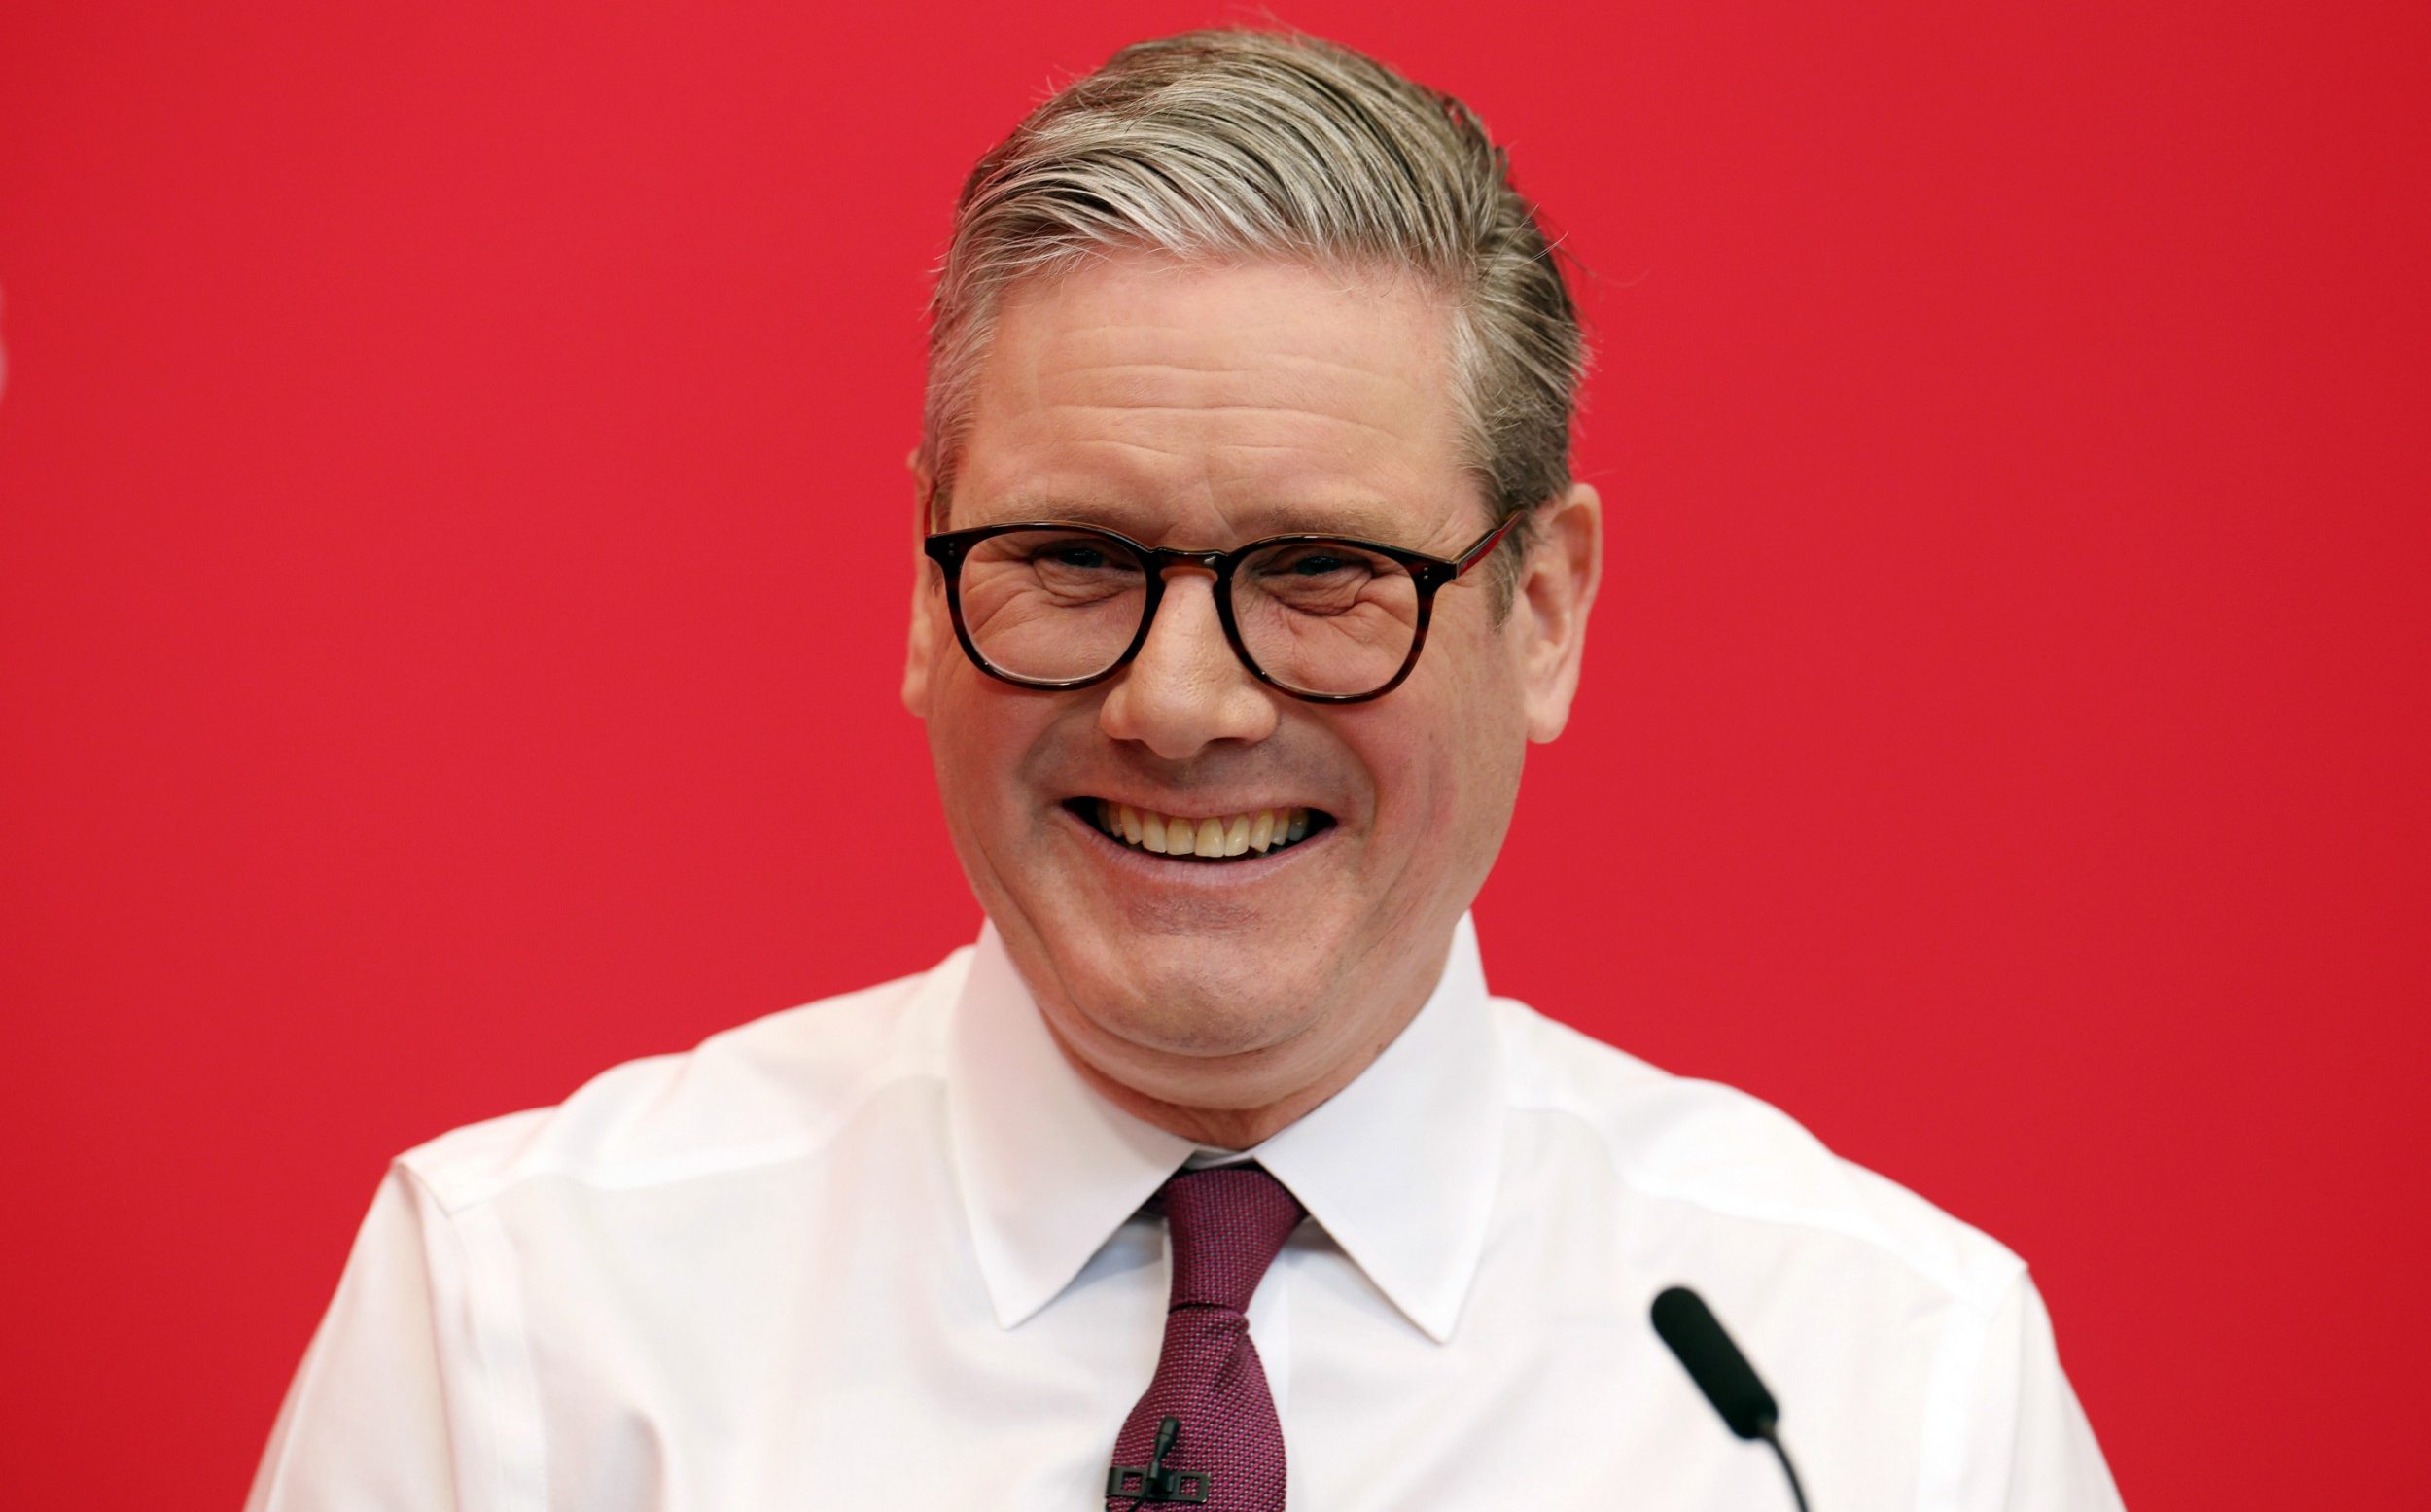 keir starmer tells cash-strapped councils: ‘there is no magic money tree’